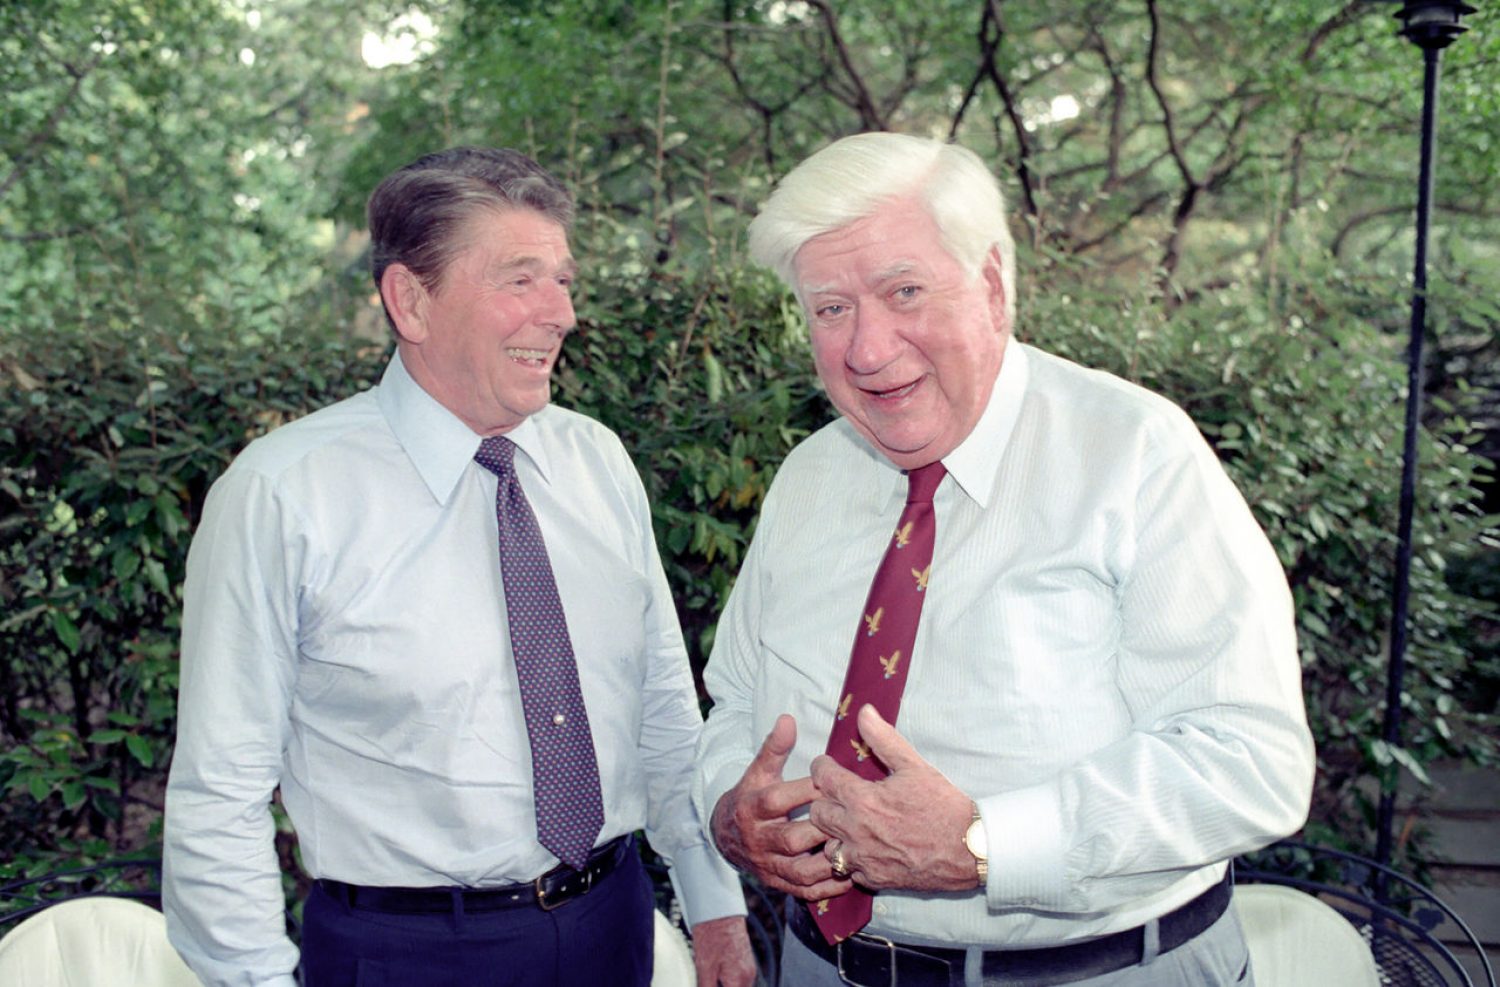 Ronald Reagan and Tip O’Neill: A Real-life Friendship